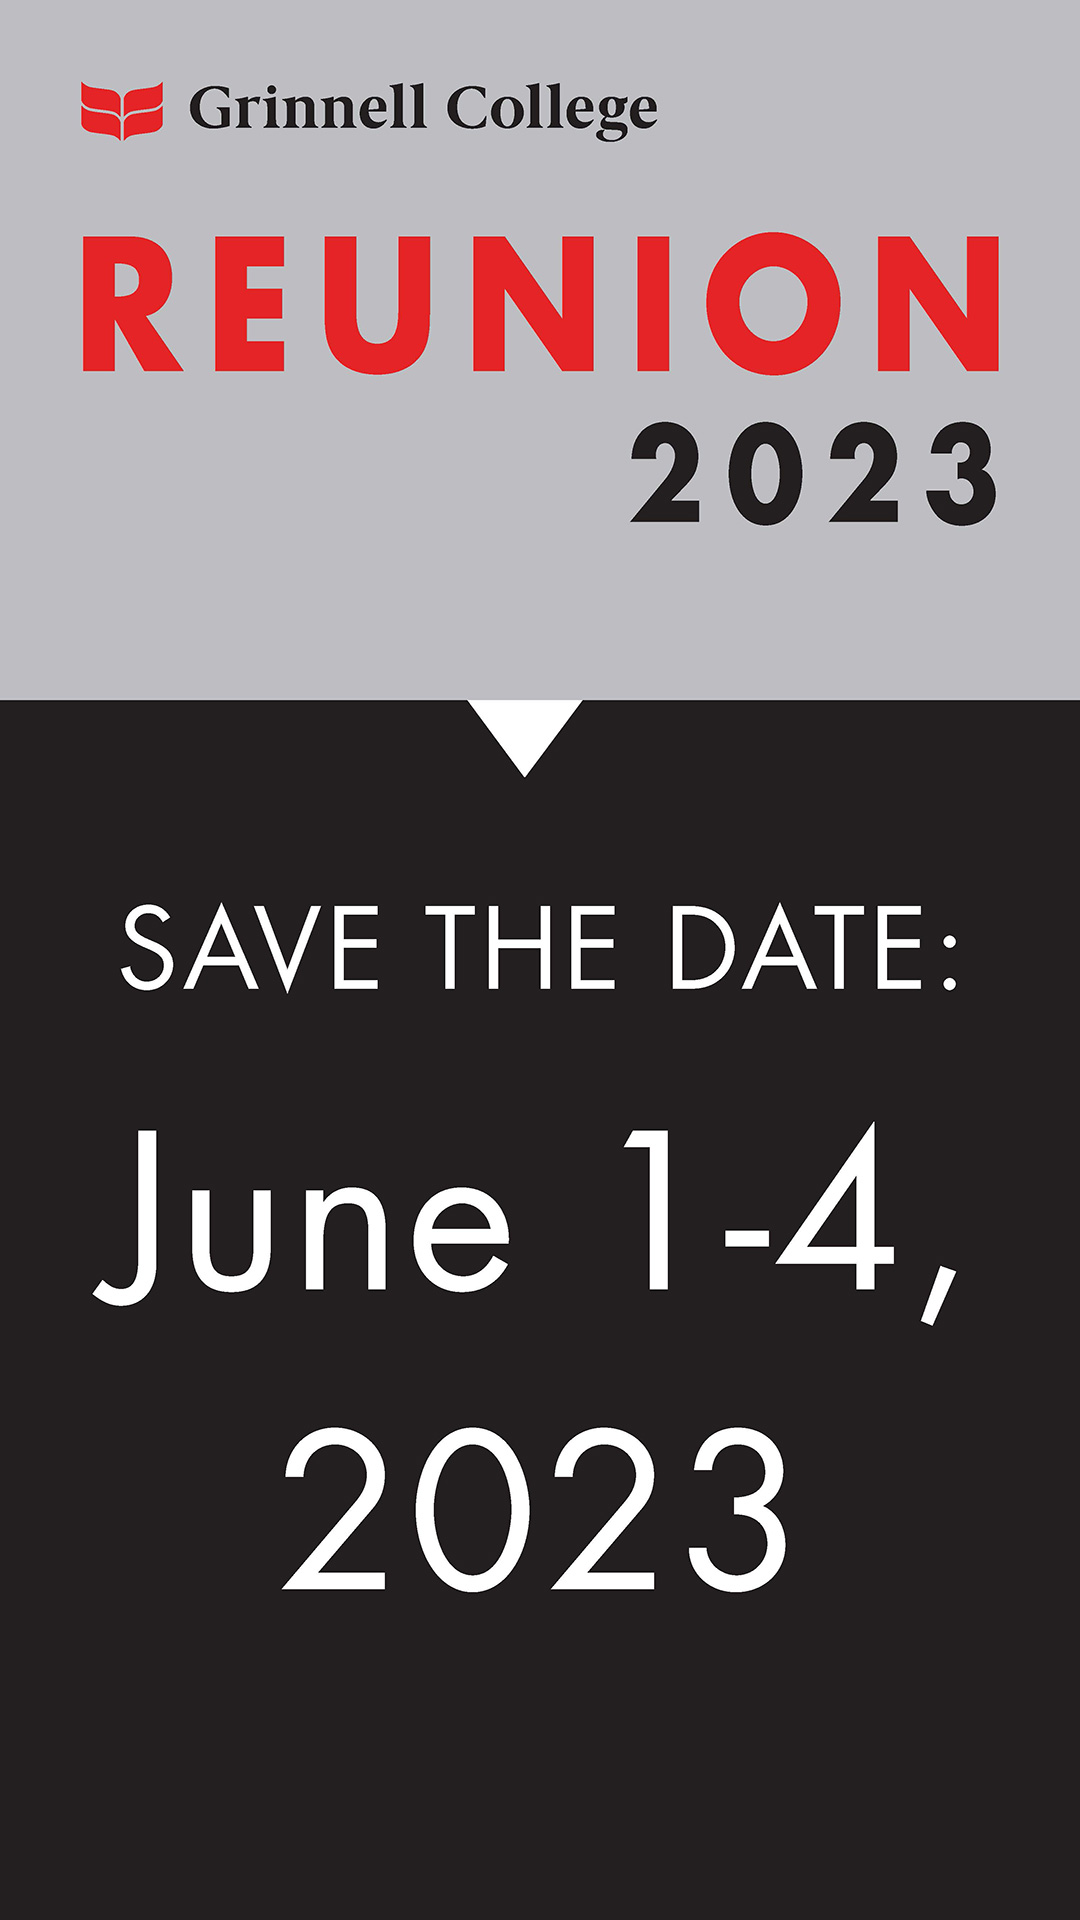 Two sections of text. First section Red and Black text over a gray background. Text: Reunion 2023. Second section white text over black background. Text: Save the date: June 1-4. 2023.